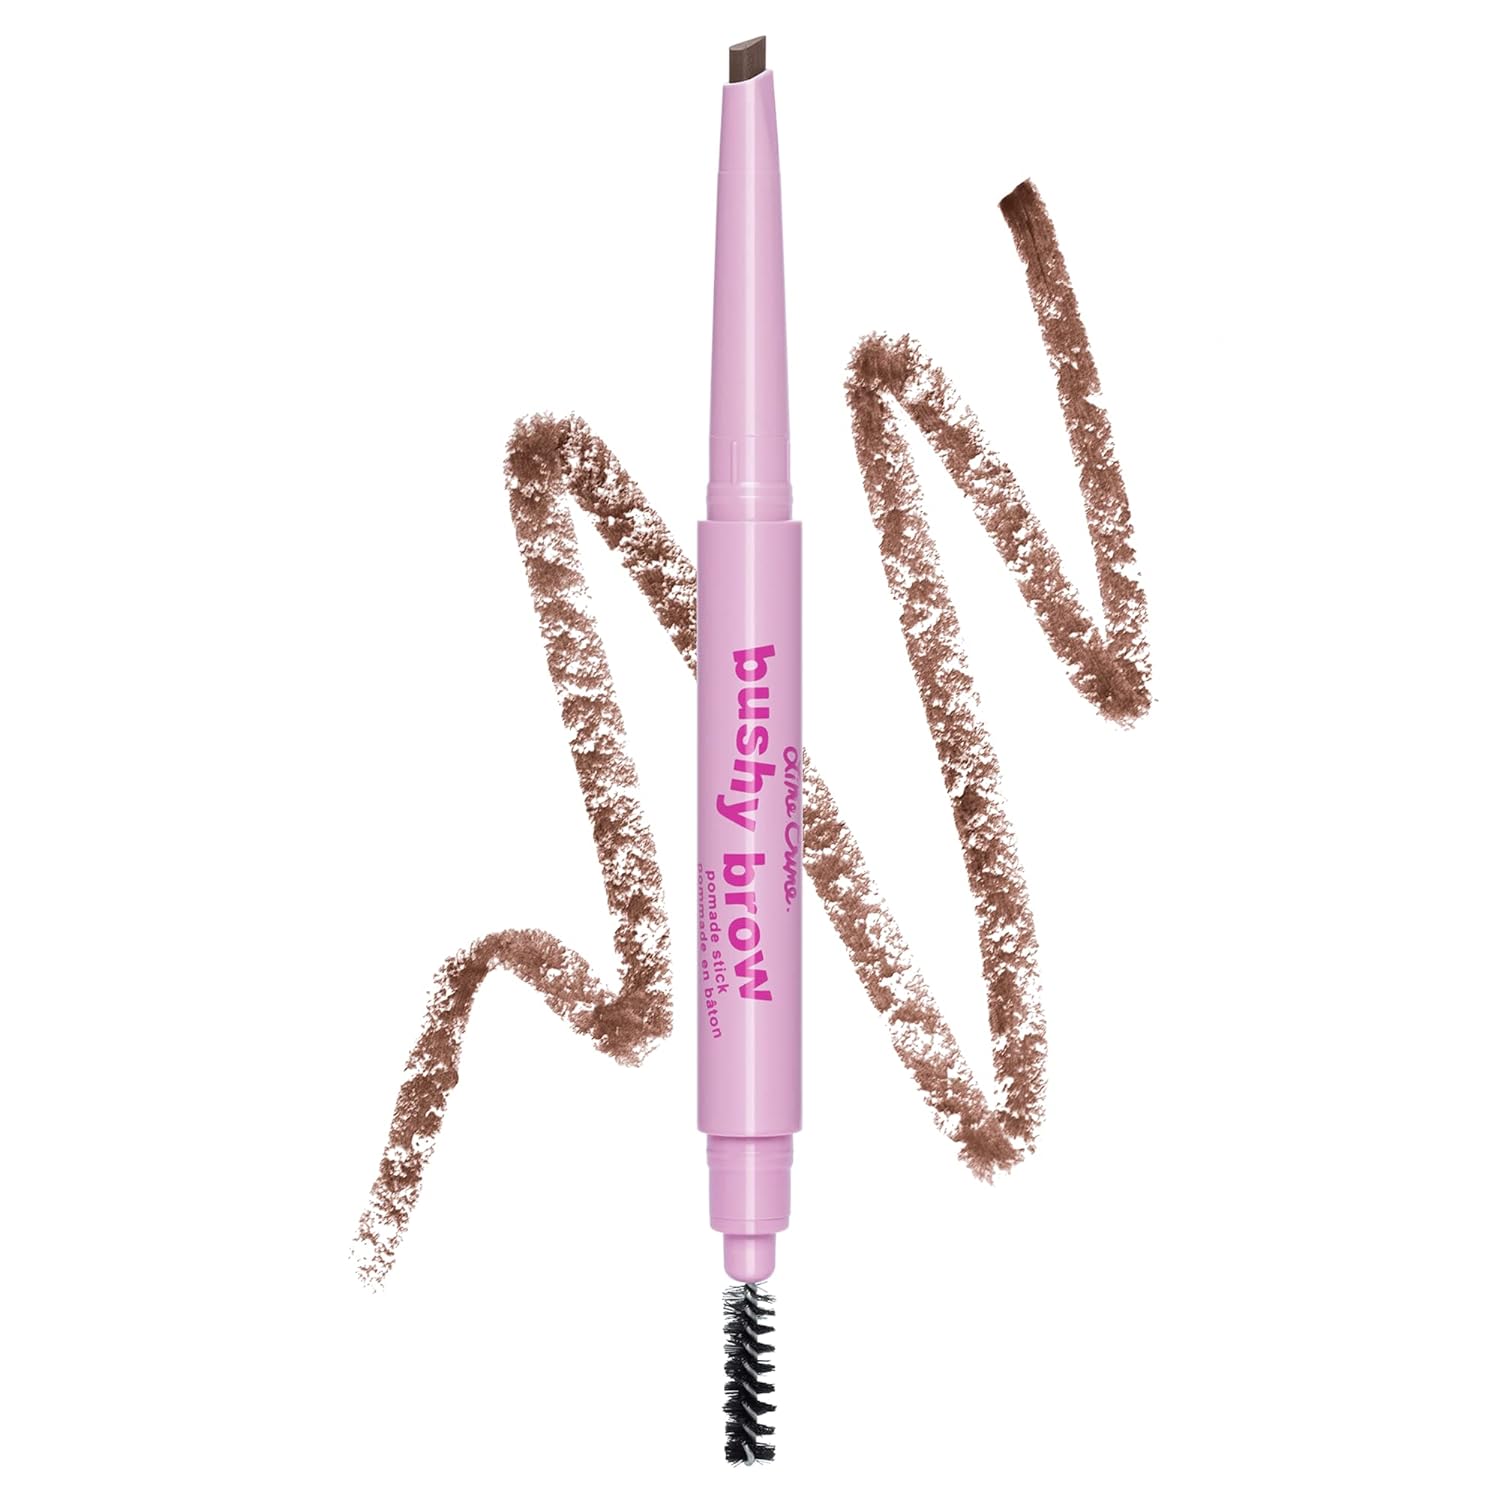 Lime Crime Bushy Brow Pomade Pencil, Chocolate Brown (Warm Deep Brown) - 2-in-1 Brush & Pomade Pencil Gives Eyebrows Volume & Texture - Long-Lasting, Defining & Smudge-Proof - Vegan, Cruelty-Free